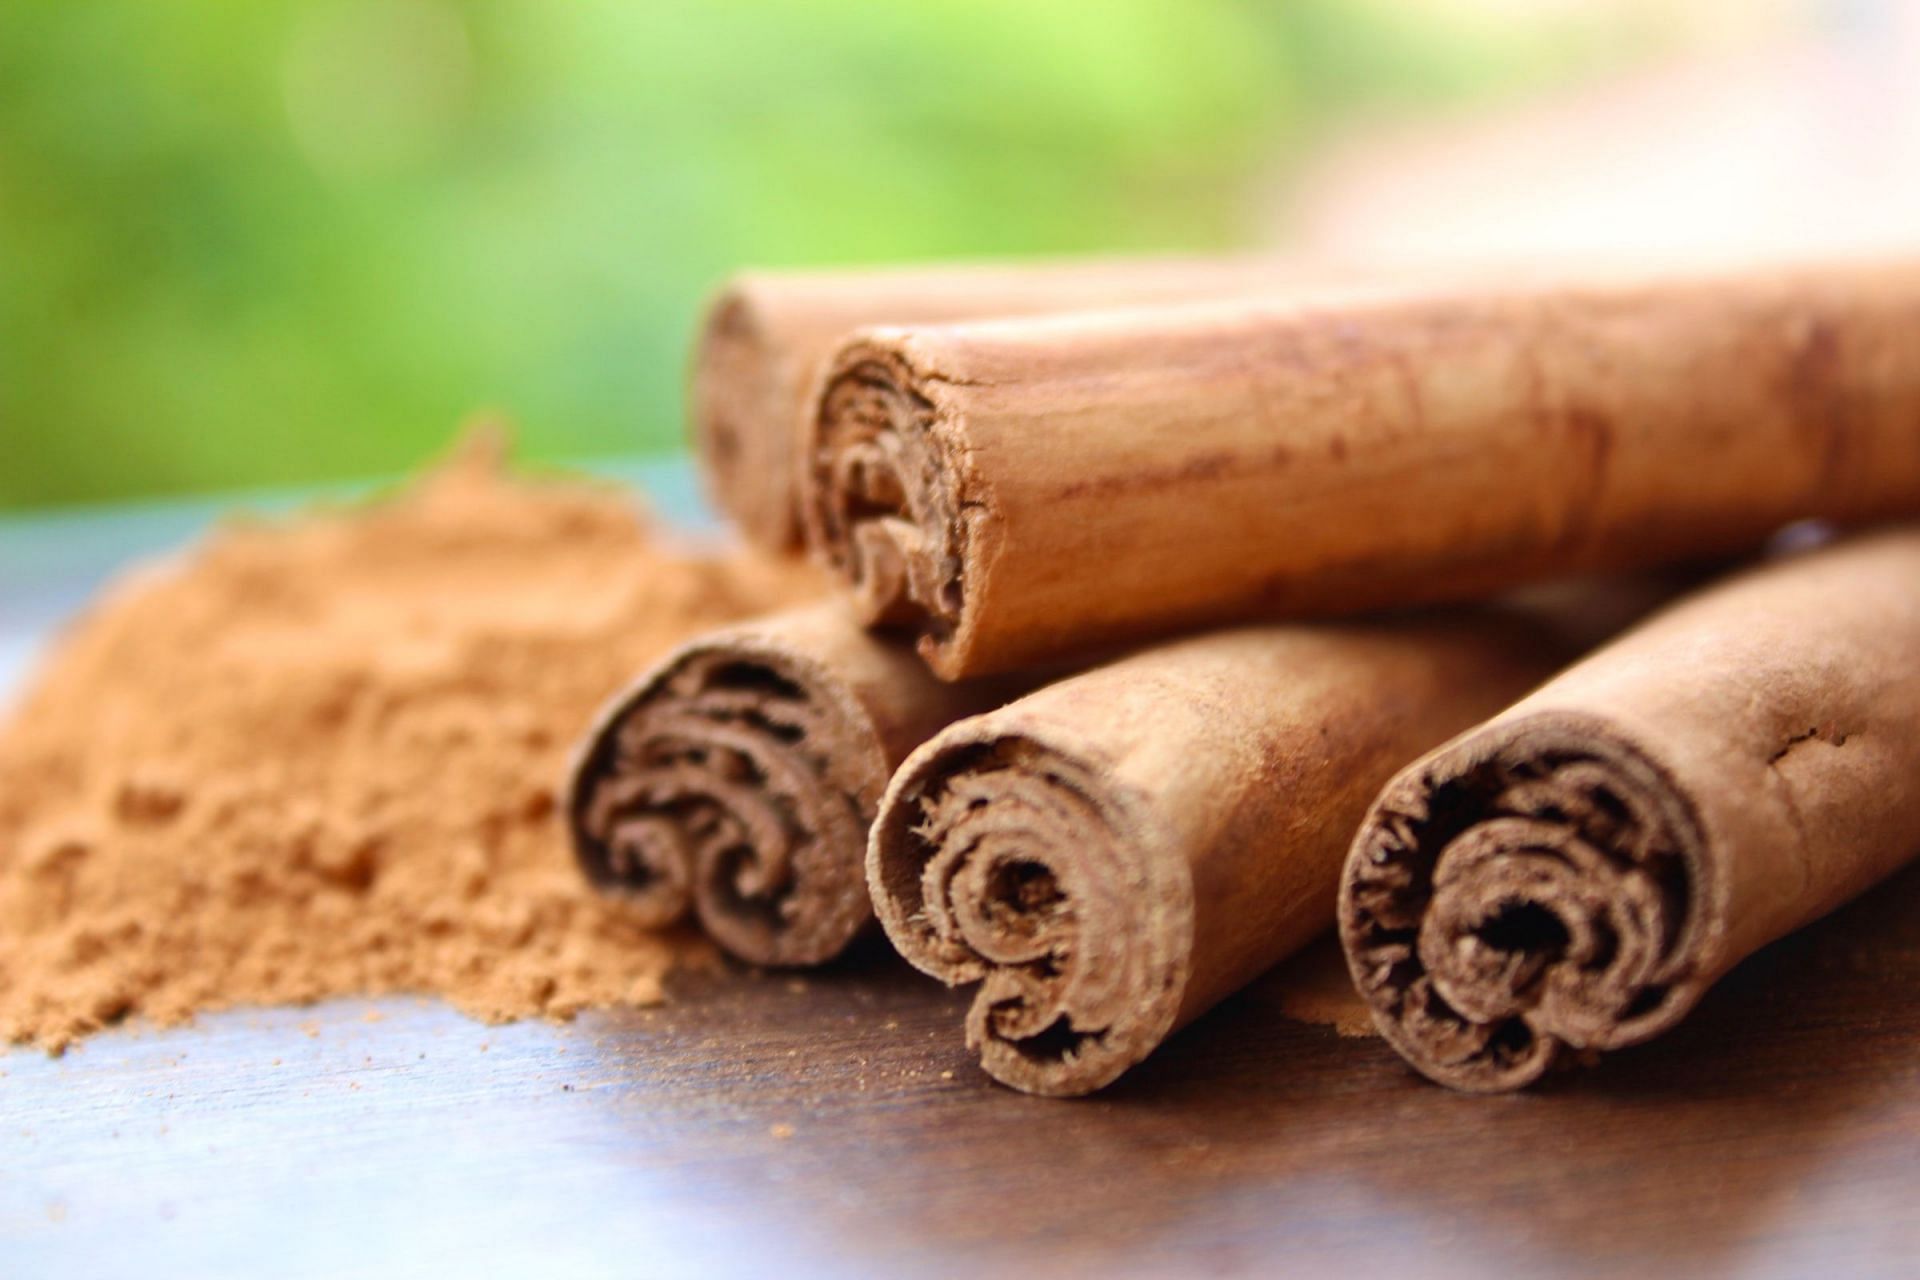 Cinnamon is found in the form of sticks and powder.(Photo by Rens D on Unsplash)